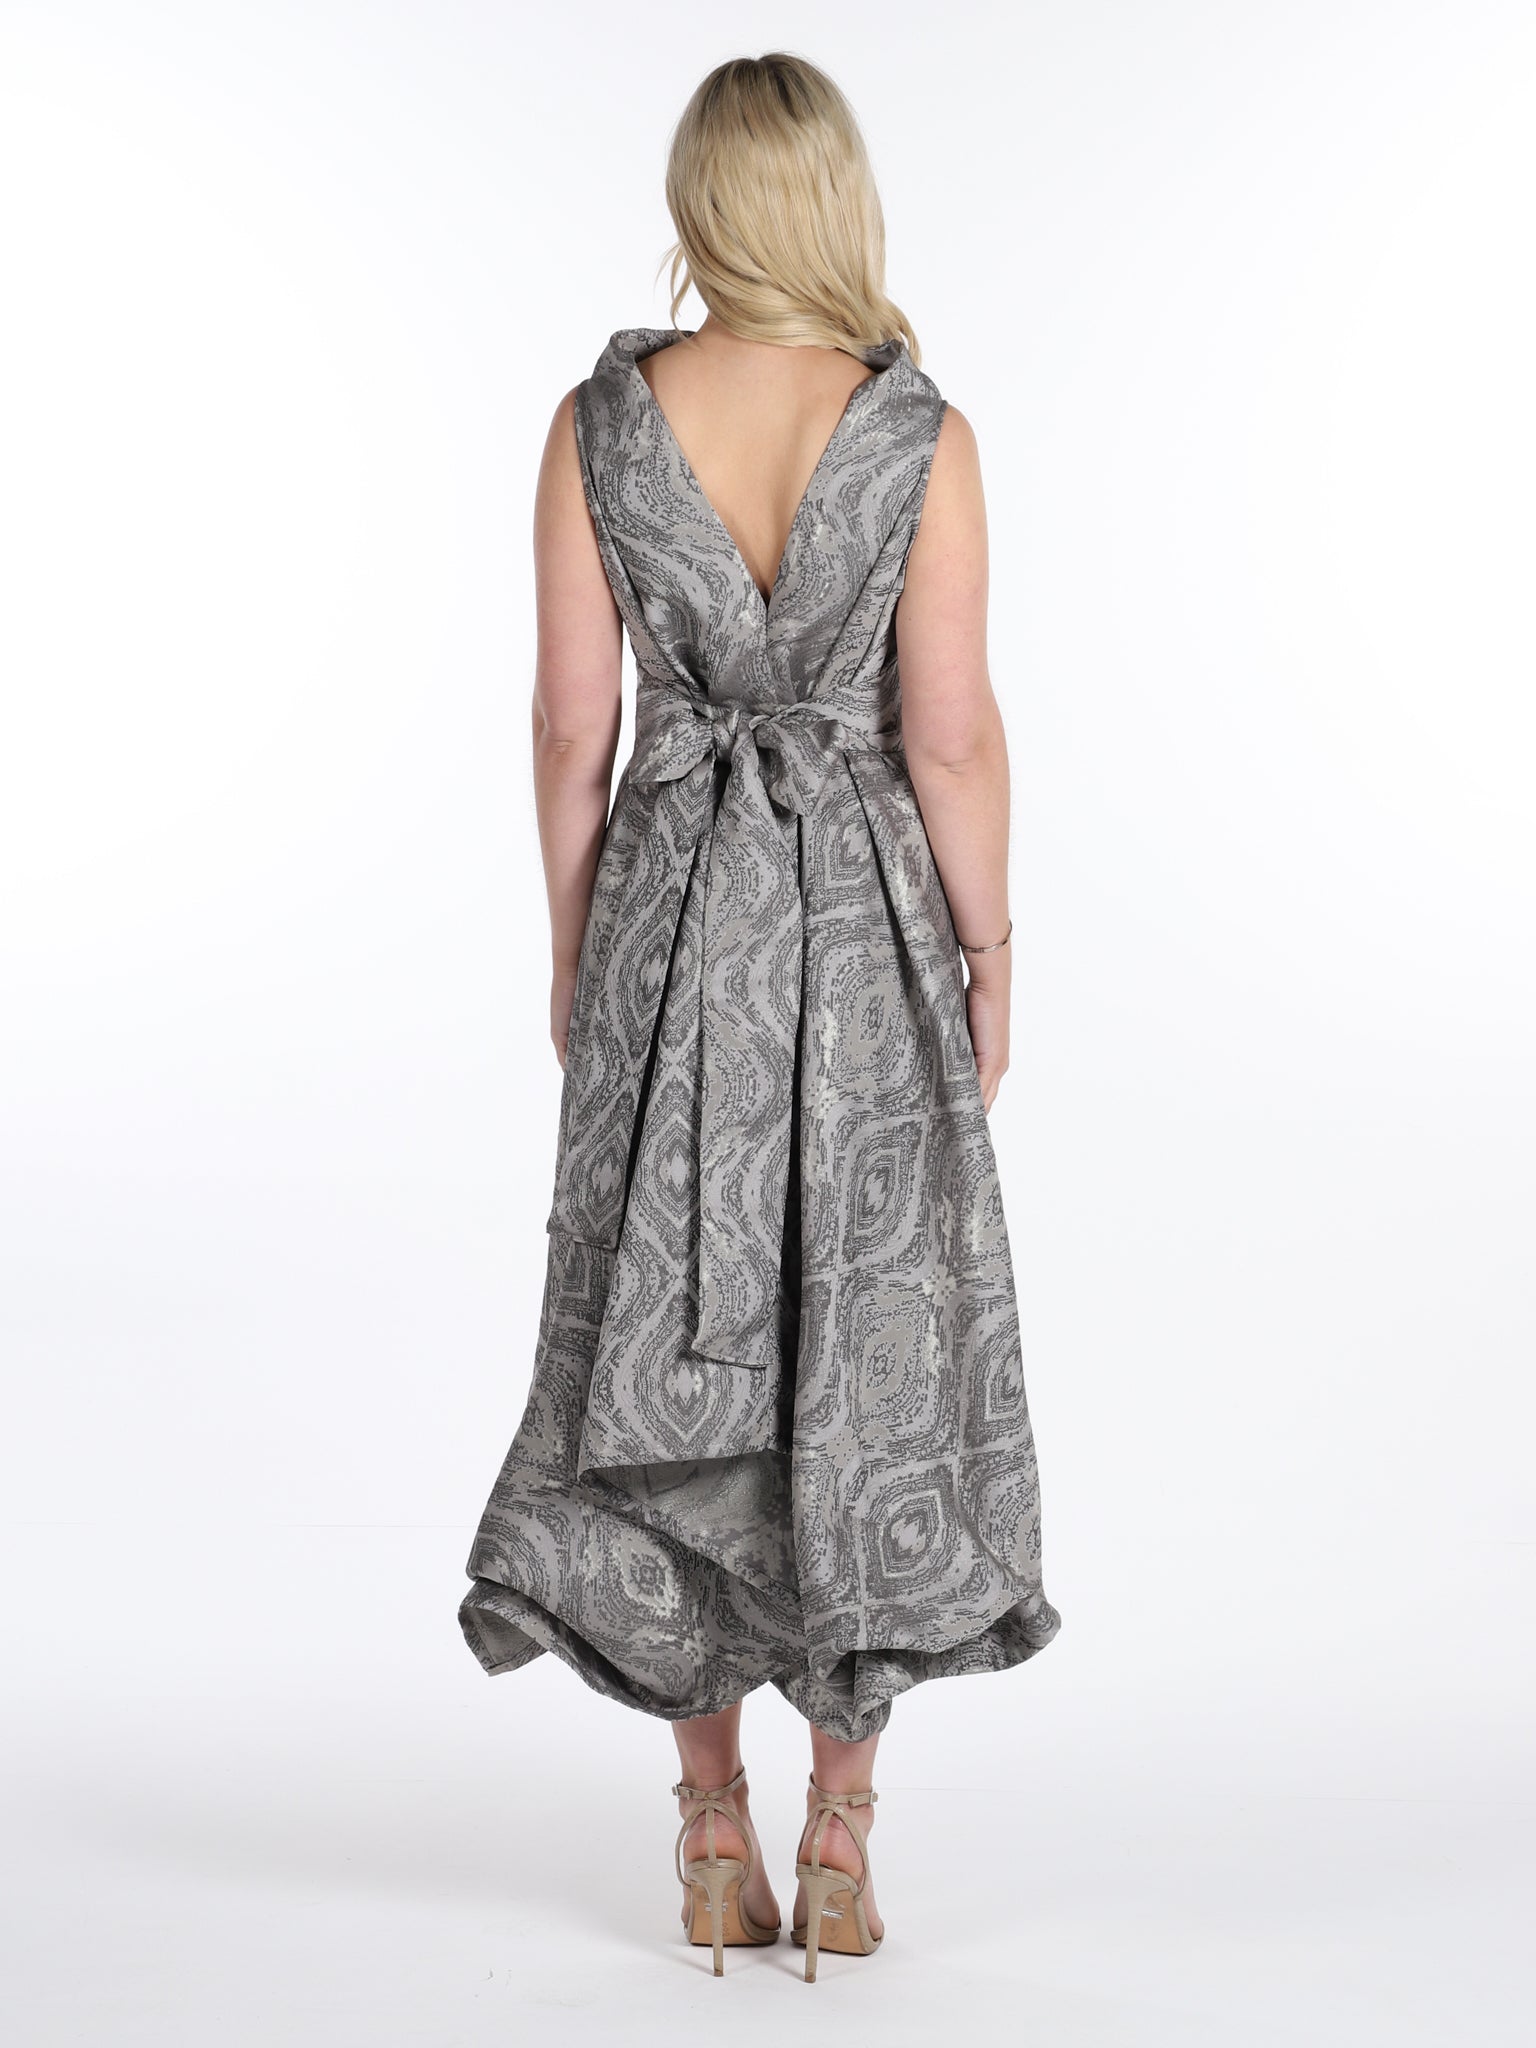 Shades of Silver Wendy Dress